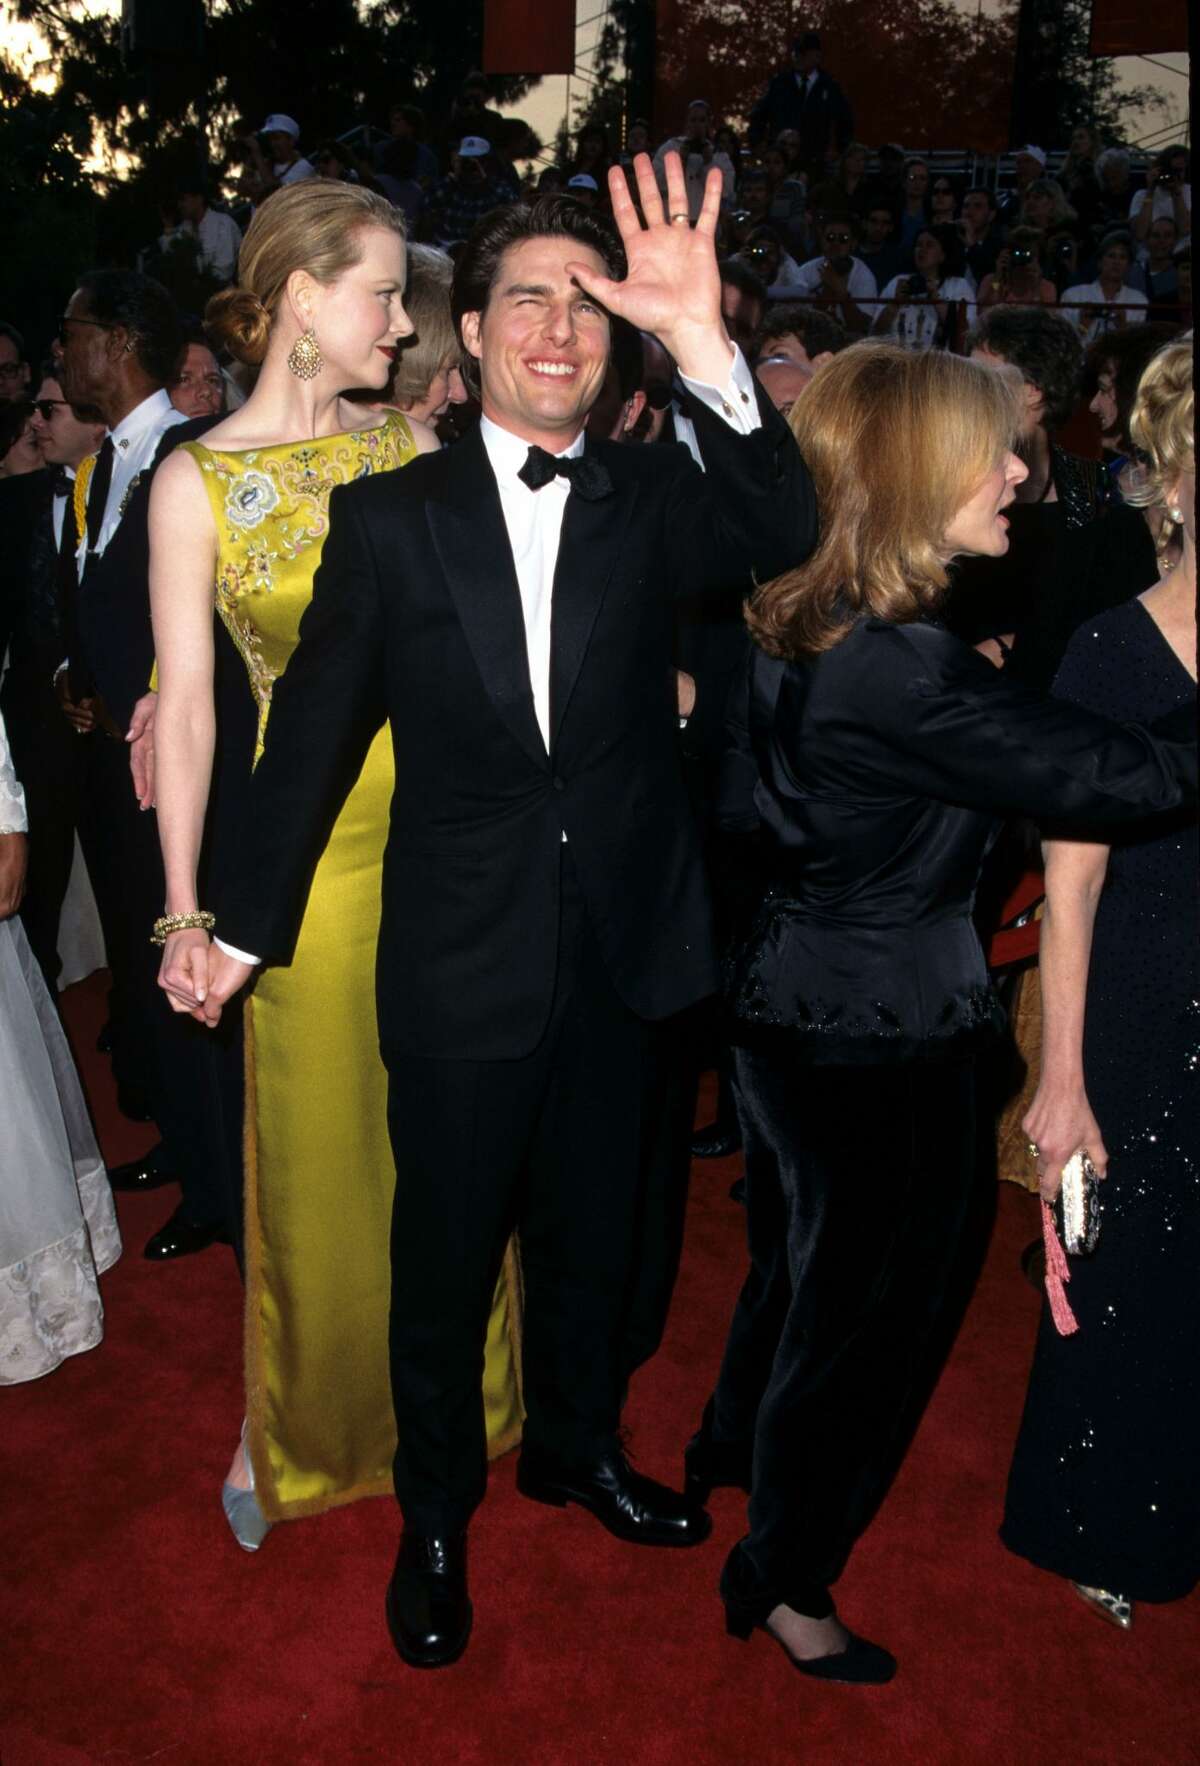 Nicole Kidman and Tom Cruise during The 69th Annual Academy Awards - Arrivals at Shrine Auditorium in Los Angeles, California, United States. (Photo by S. Granitz/WireImage)